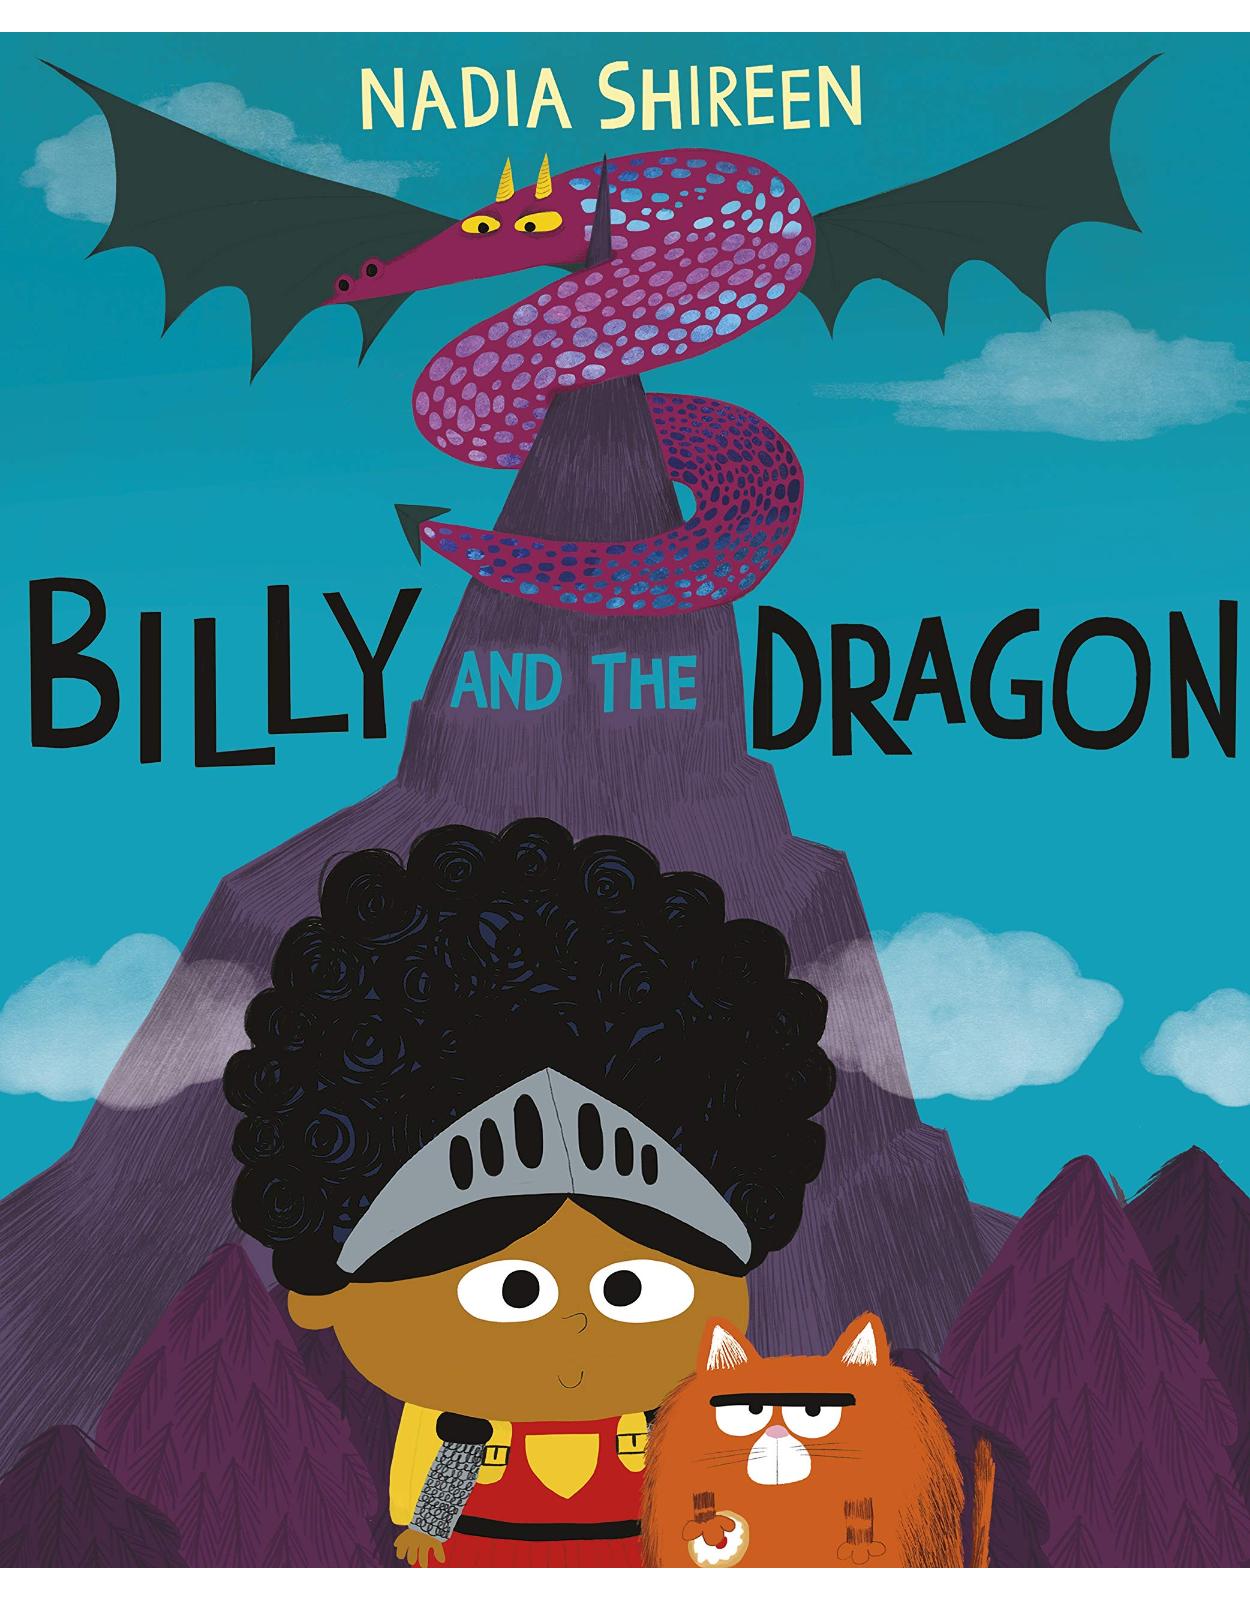 Billy and the Dragon